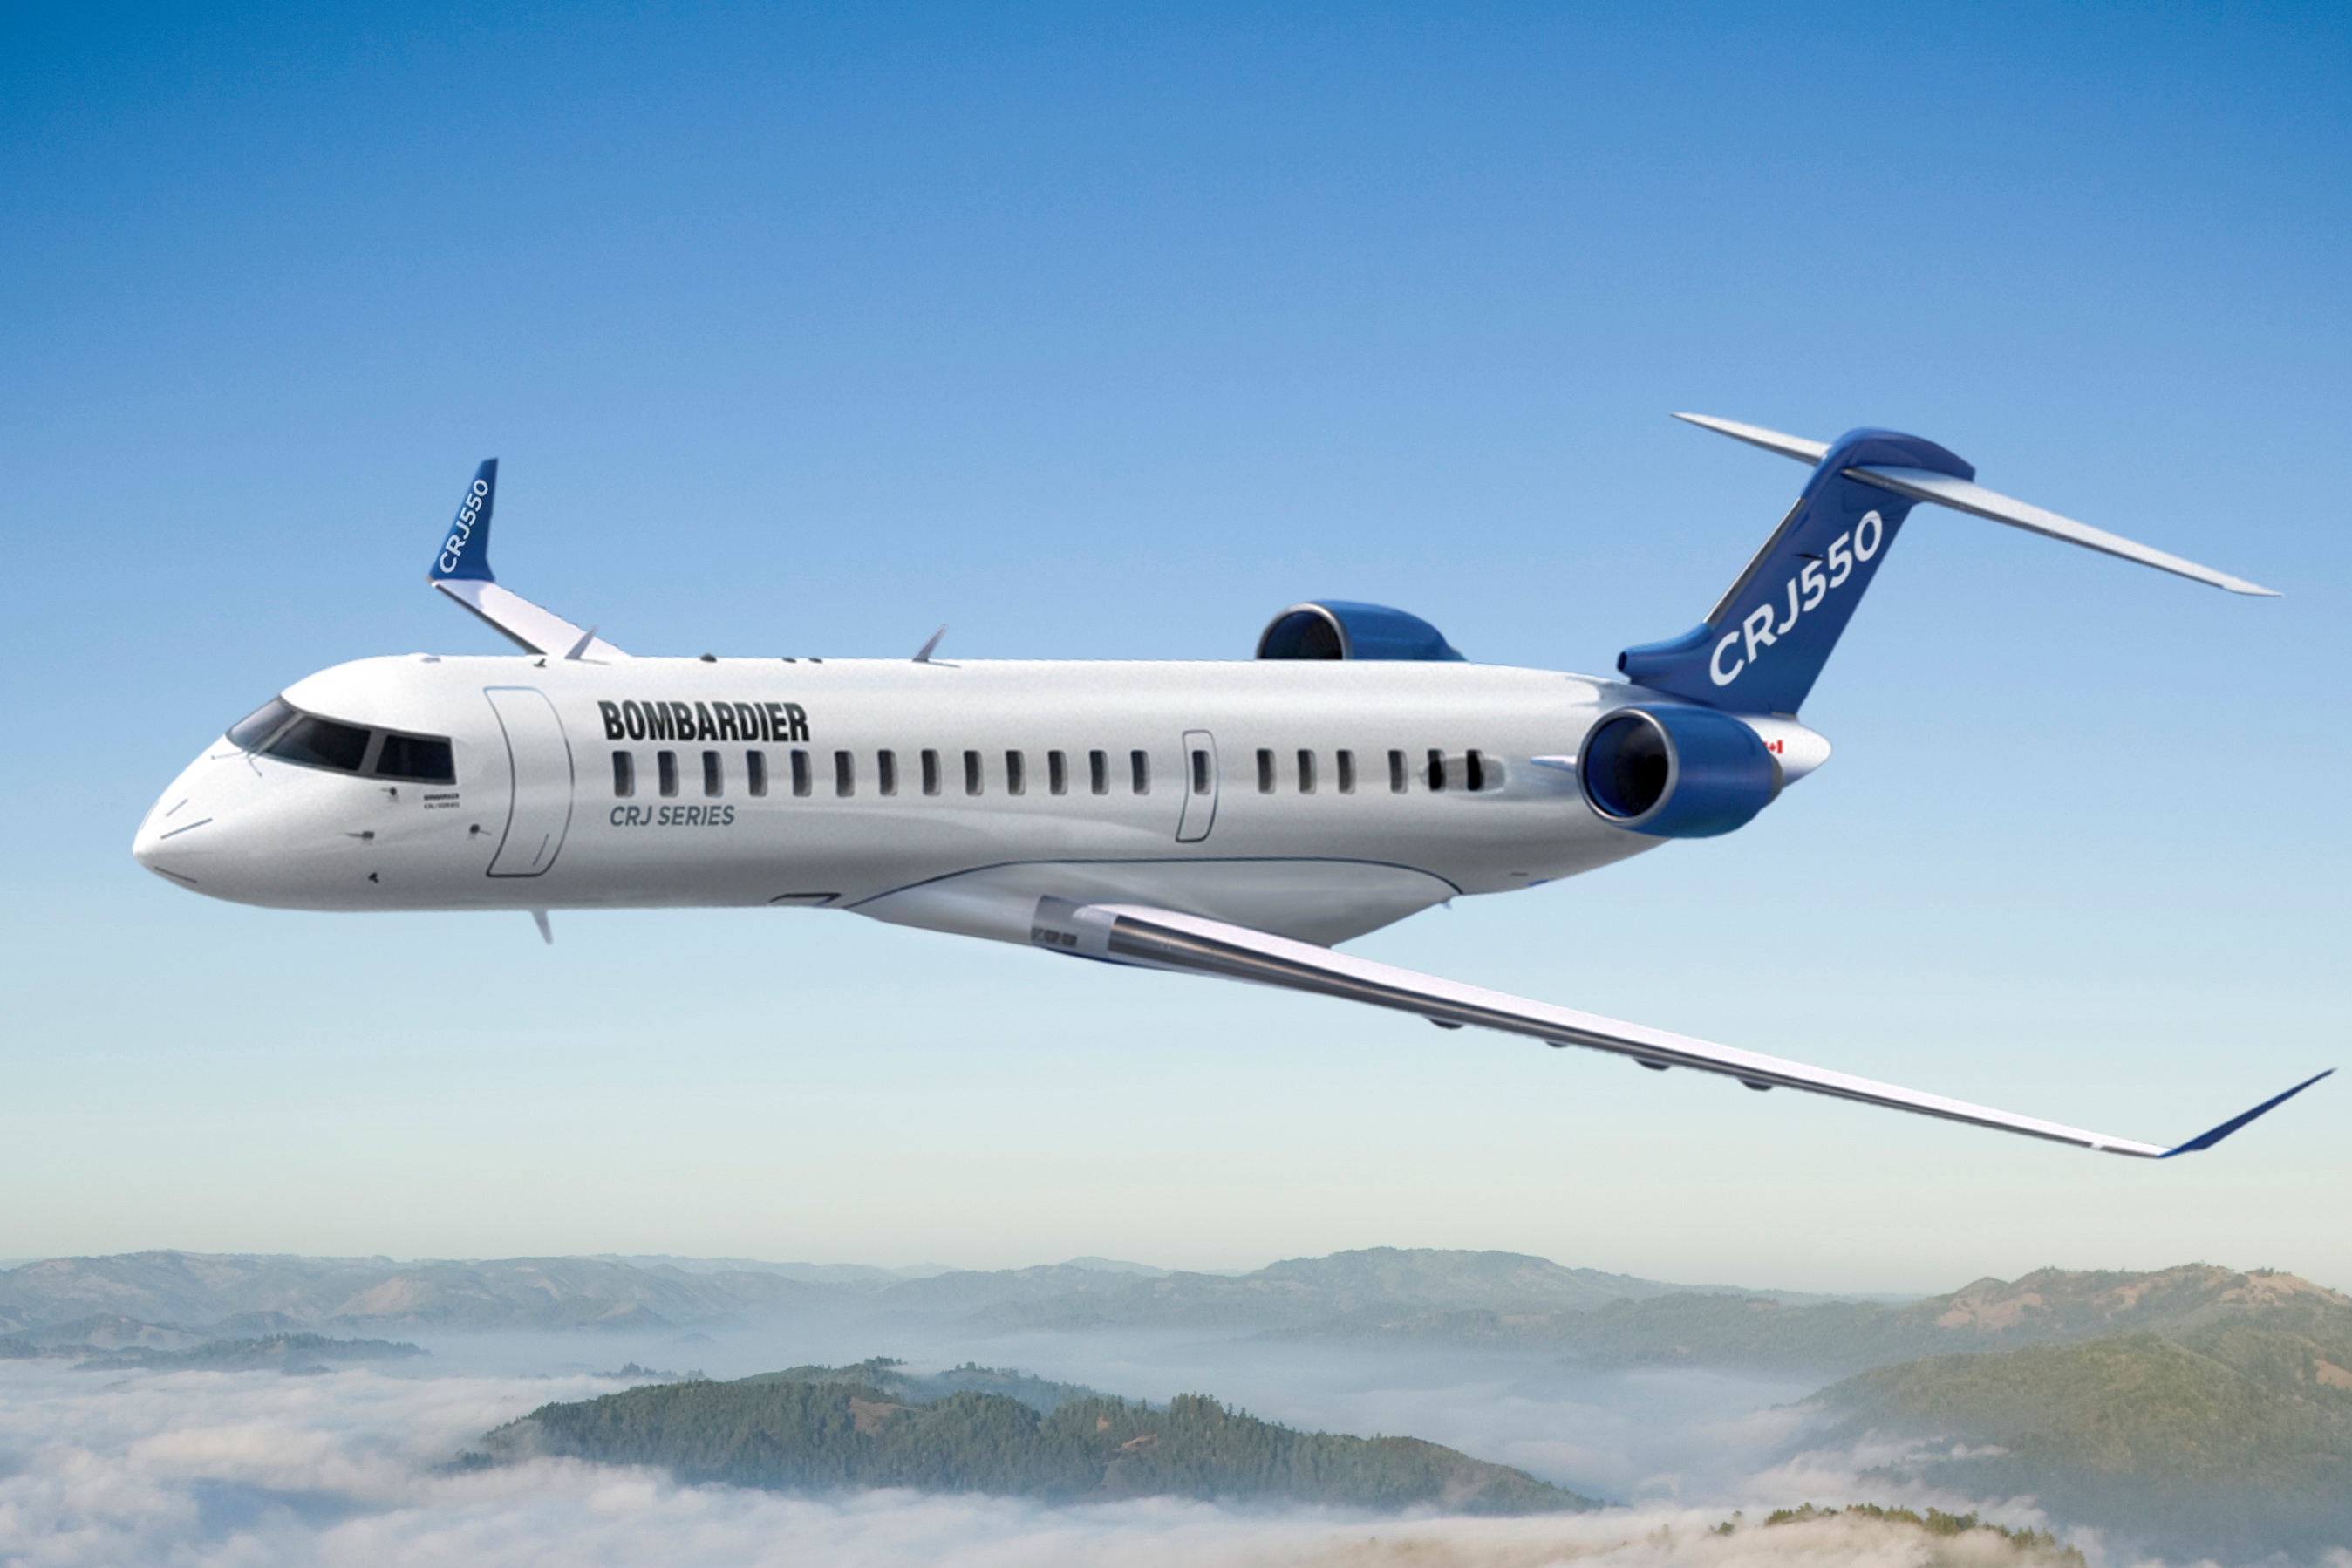 Bombardier CRJ550. Click to enlarge.